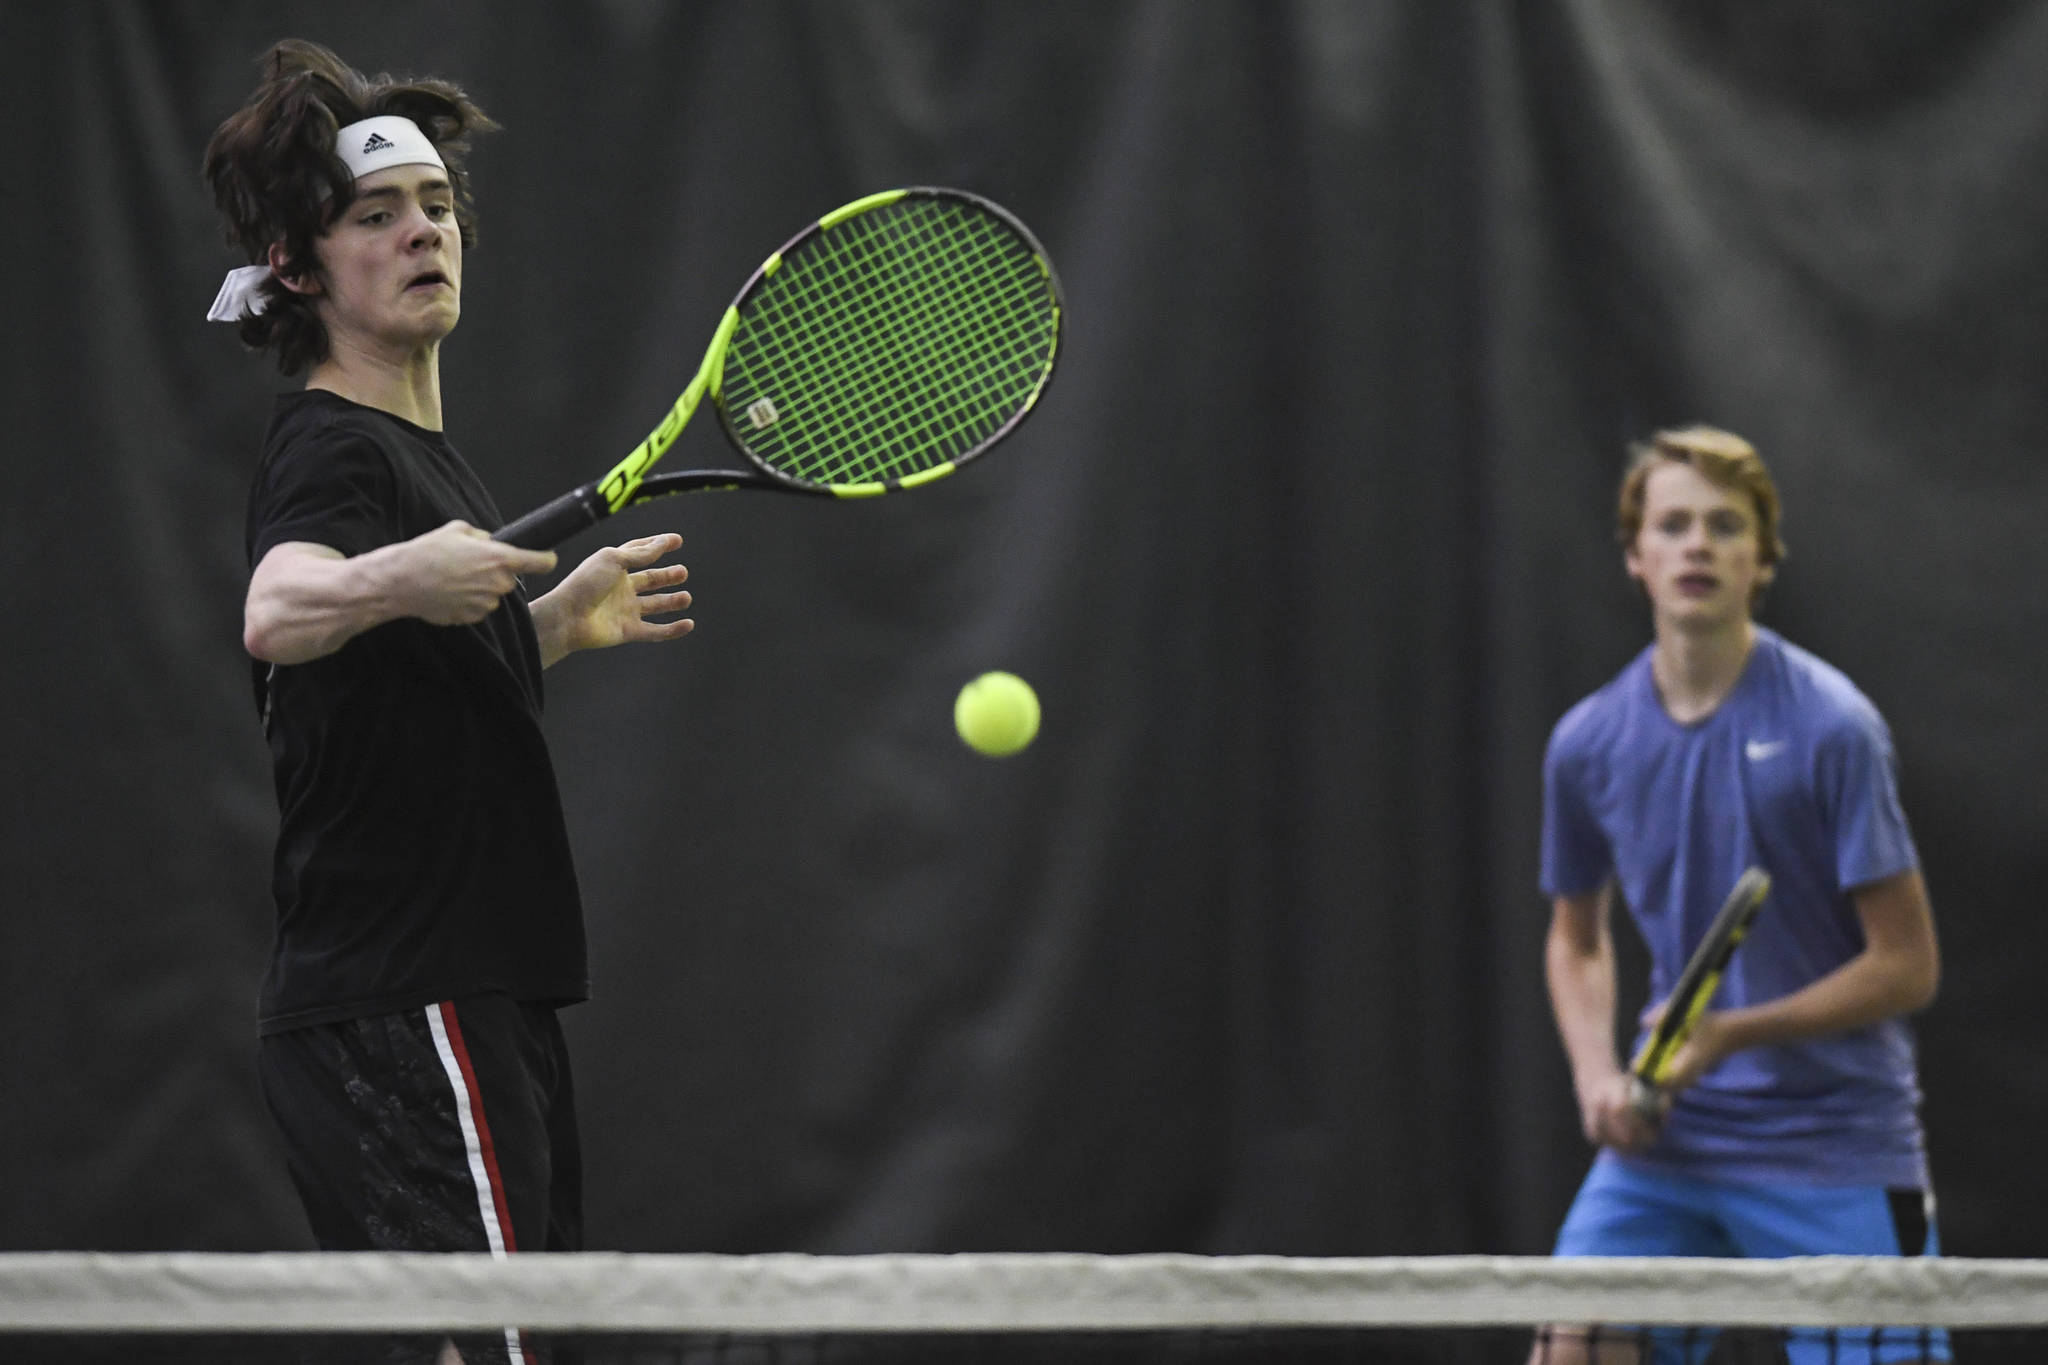 William Smoker, left, volleys in front of his partner, Will Rehfeldt as they play against Luke Bibb and Reed Loree at the Region V Tennis Tournament at the Alaska Club/JRC on Wednesday, Sept. 25, 2019. Smoker and Rehfeldt won the match 6-0, 6-0, and played Liam Penn and Callan Smith in the final on Saturday. (Michael Penn | Juneau Empire)